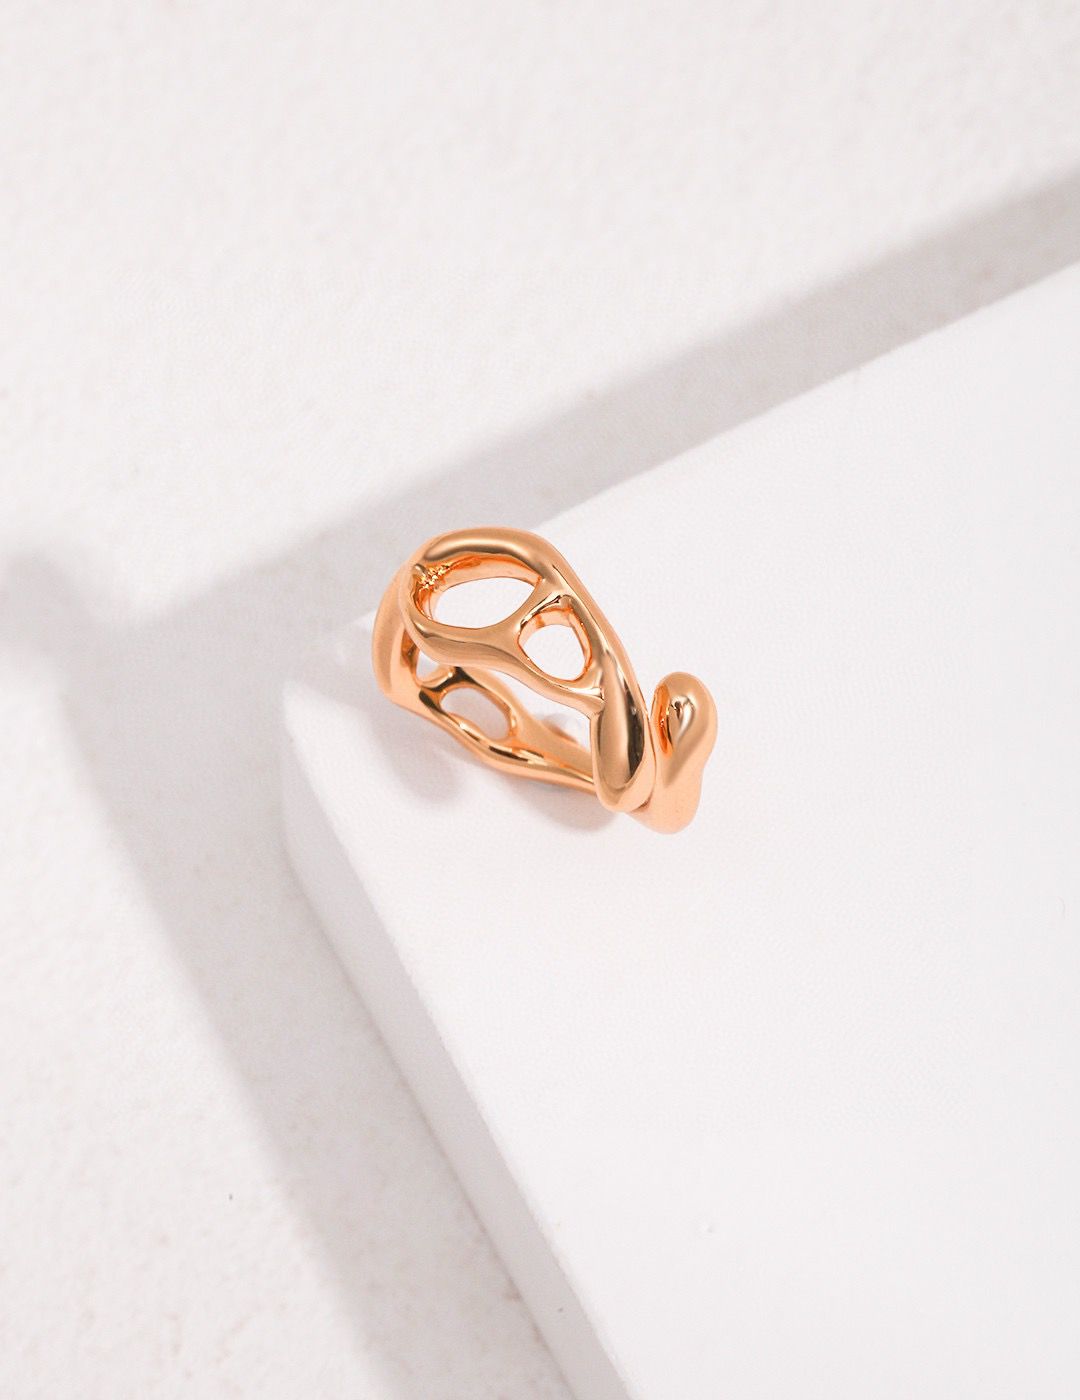 Minimalist Chic Ring with Clean and Streamlined Design